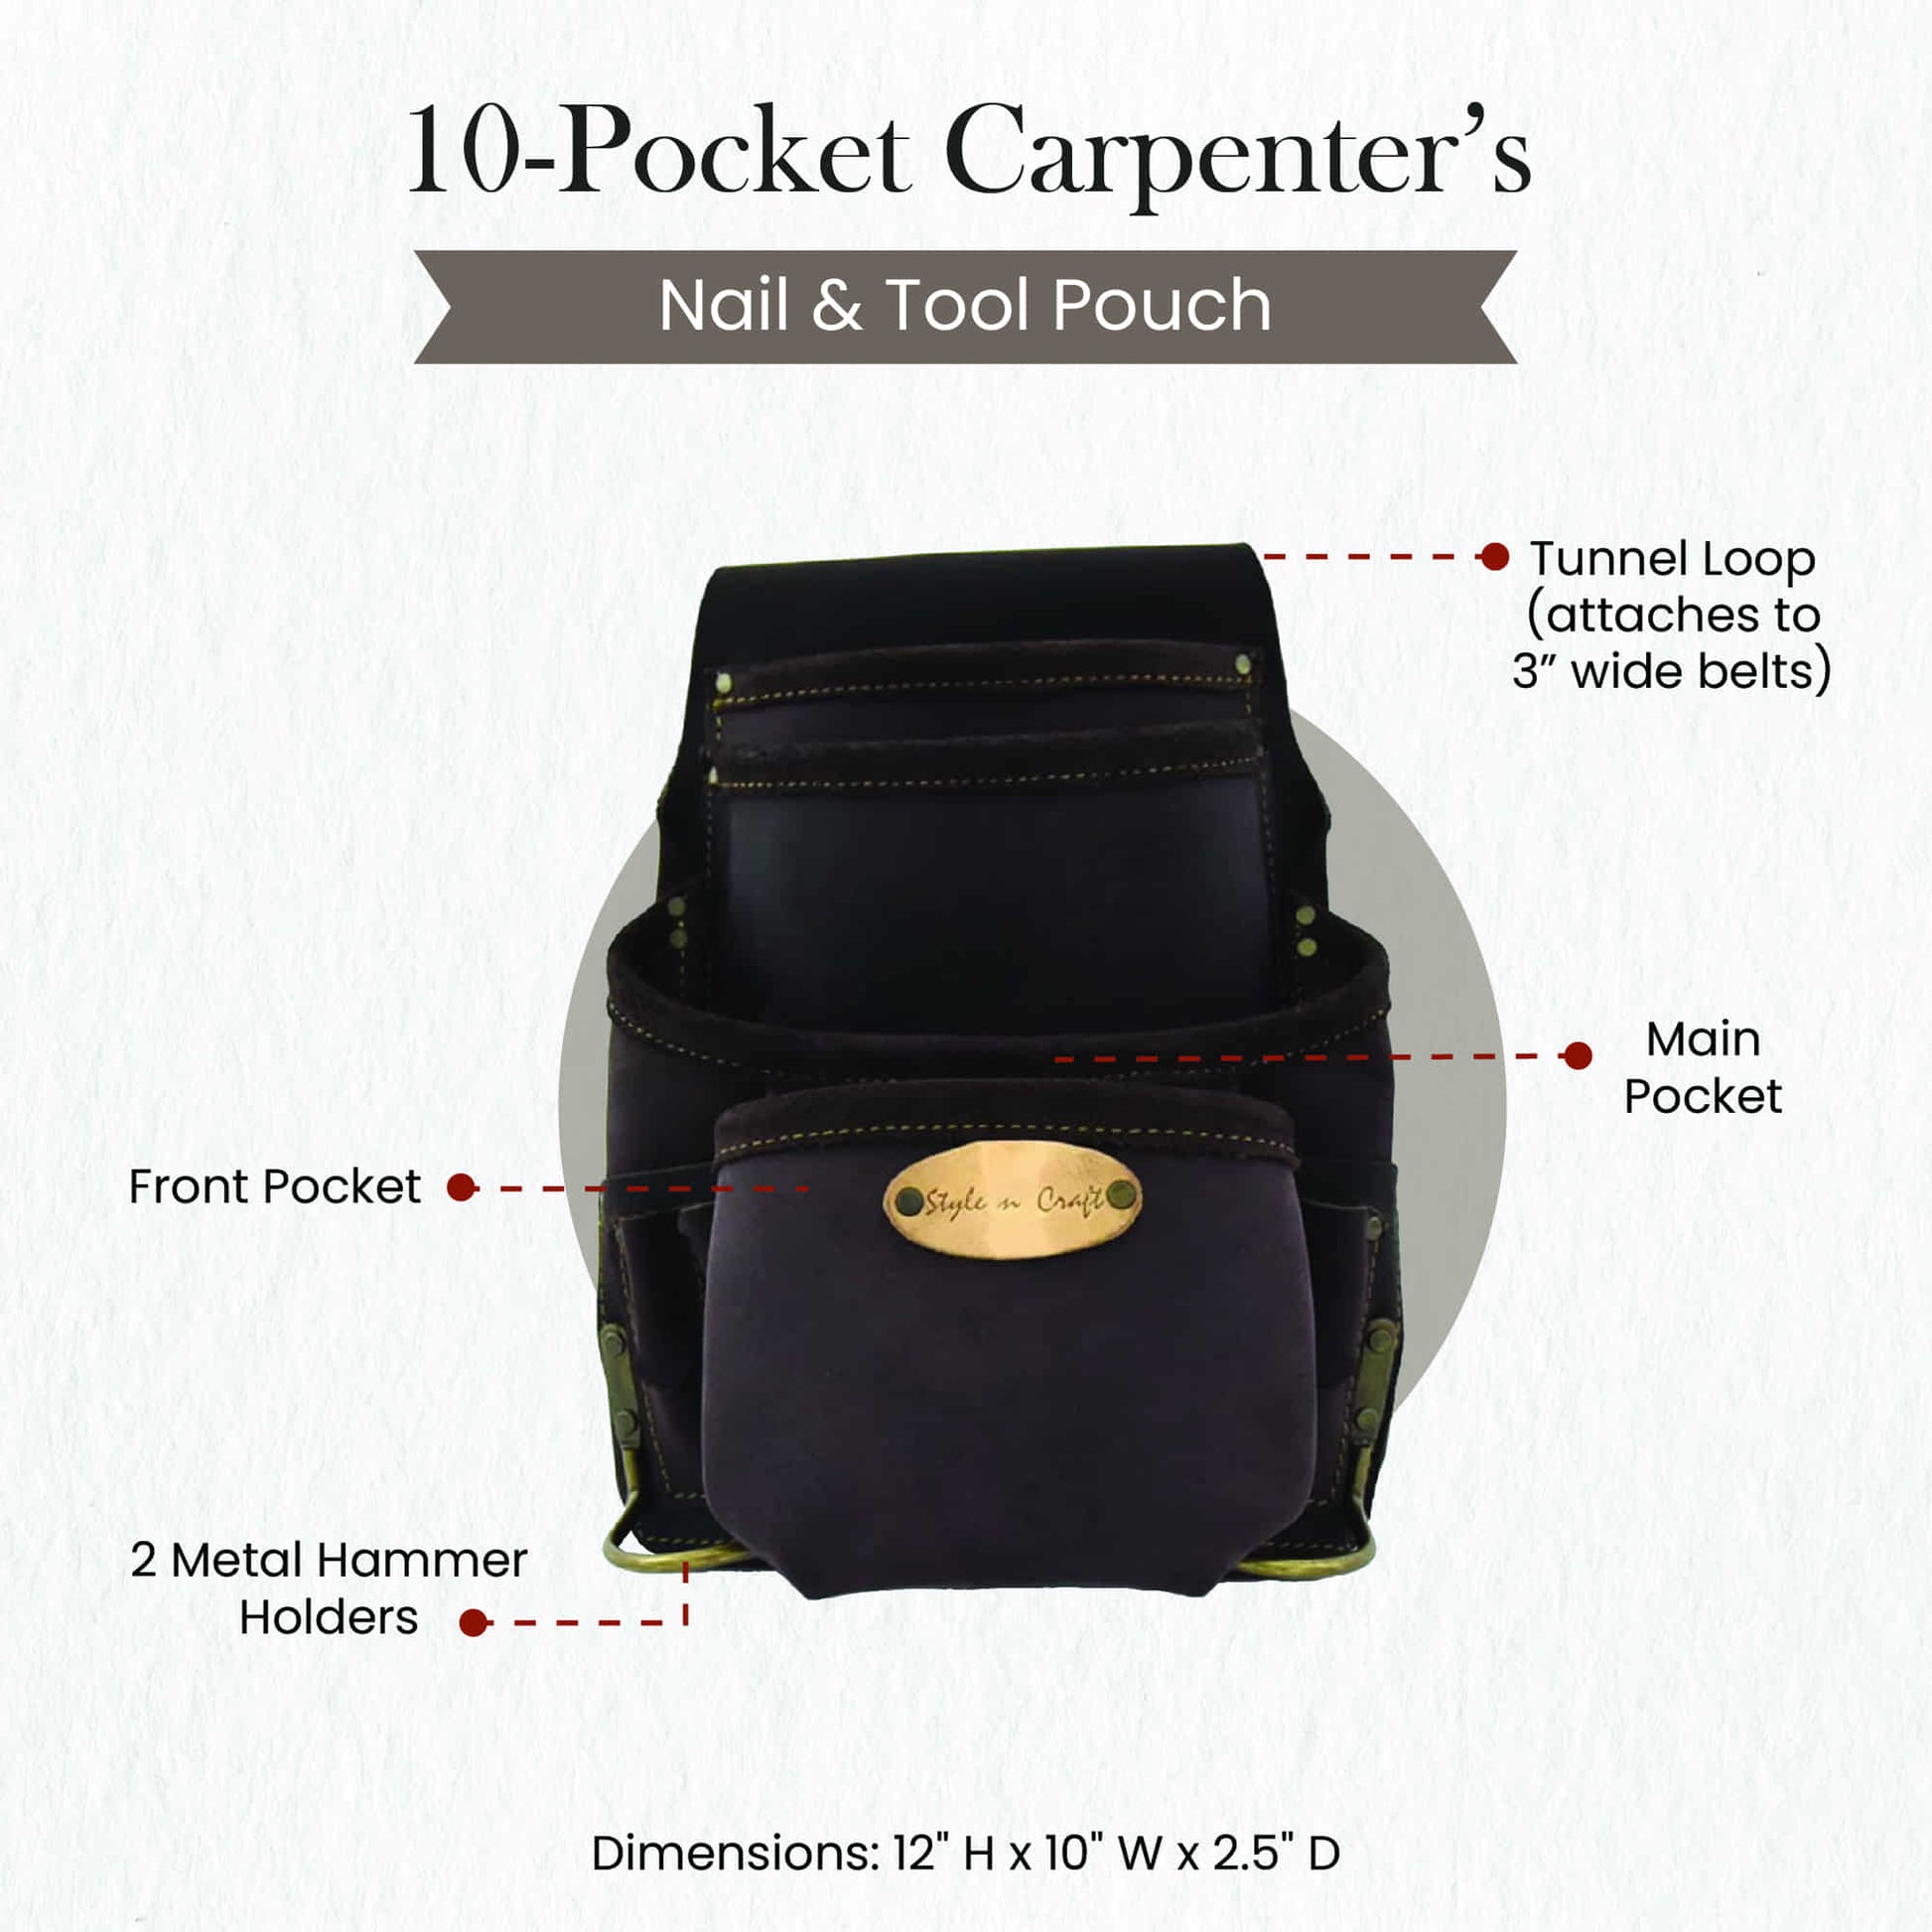 Style n Craft 90926 - 10 Pocket Carpenter's Nail and Tool Pouch in Dark Brown Color Oiled Full Grain Leather with Wider Construction of Main & Front Pockets - Front View showing the  Details